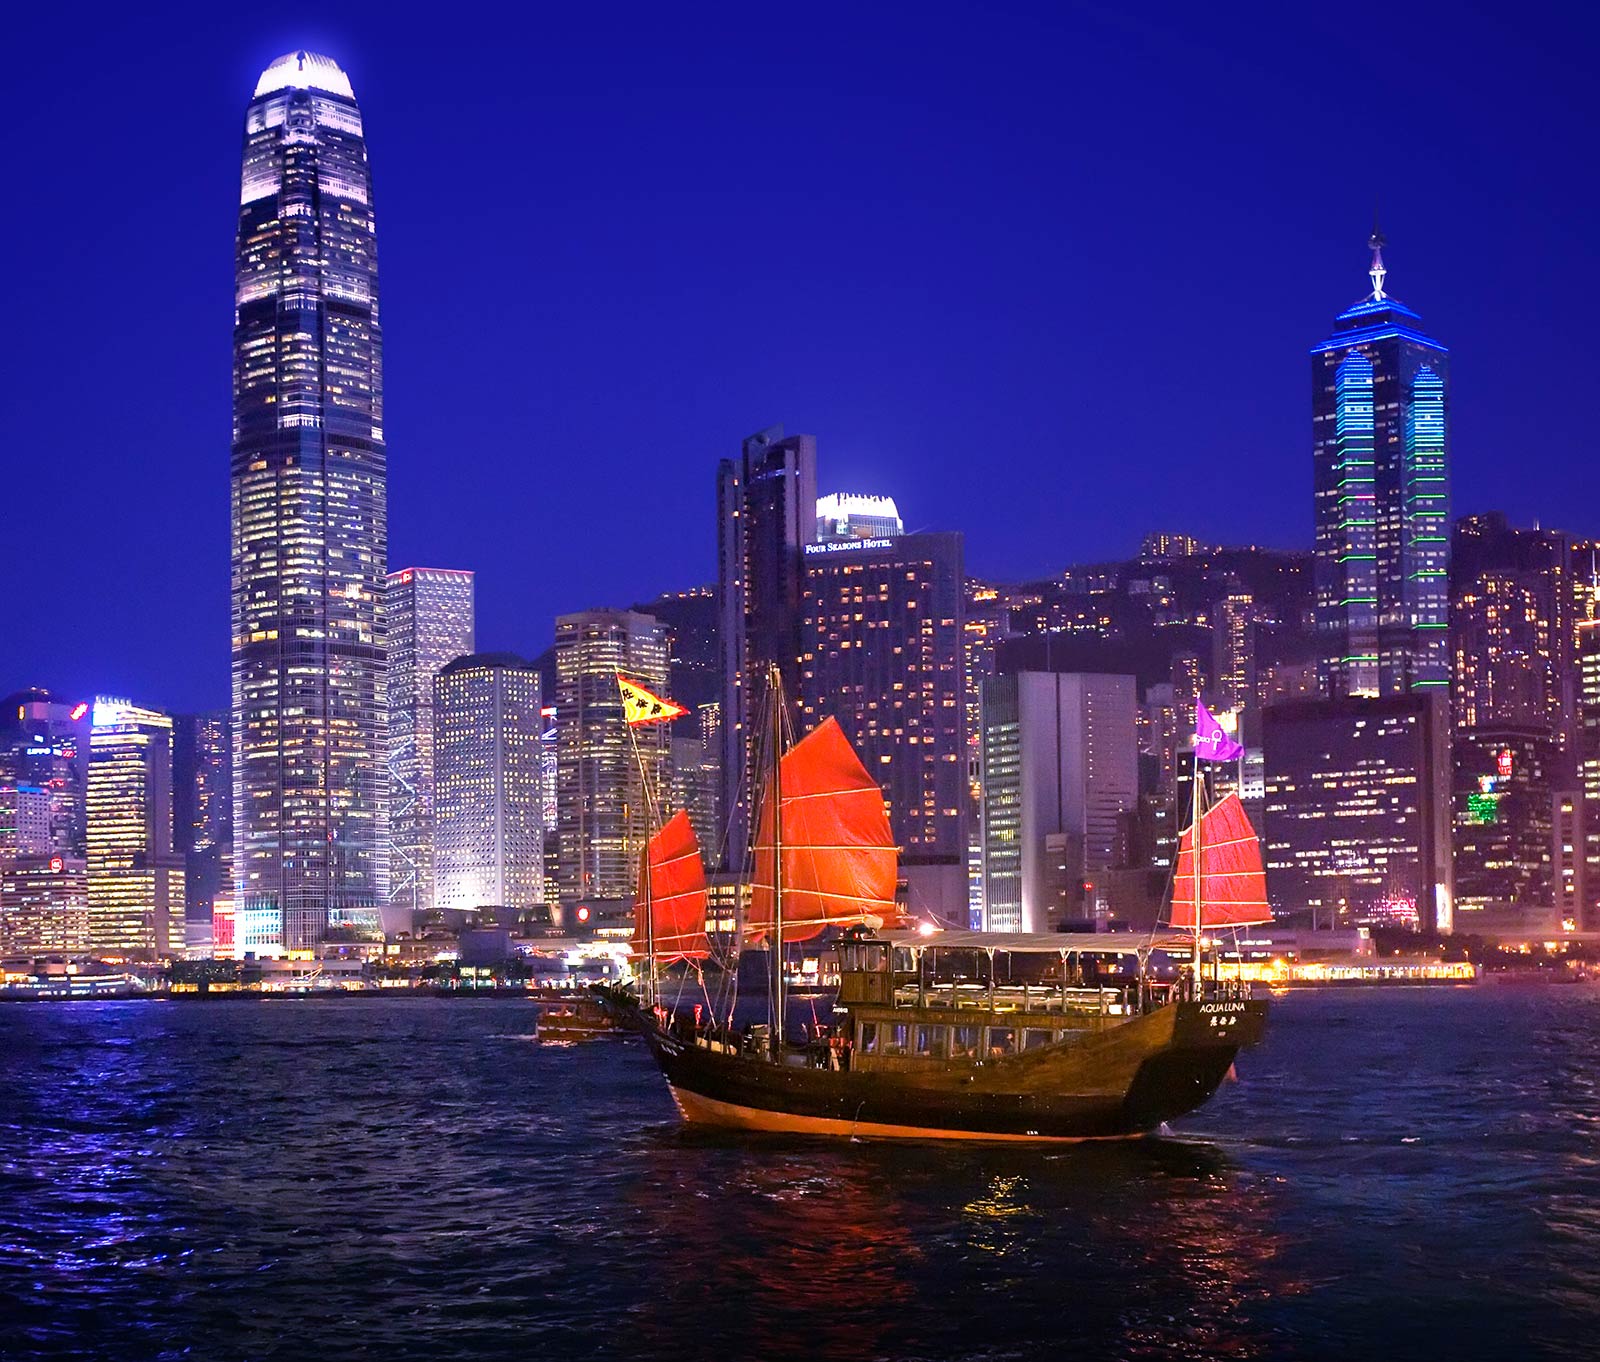 Hong Kong skyline at night with the Aqua Luna boat on Victoria Harbour